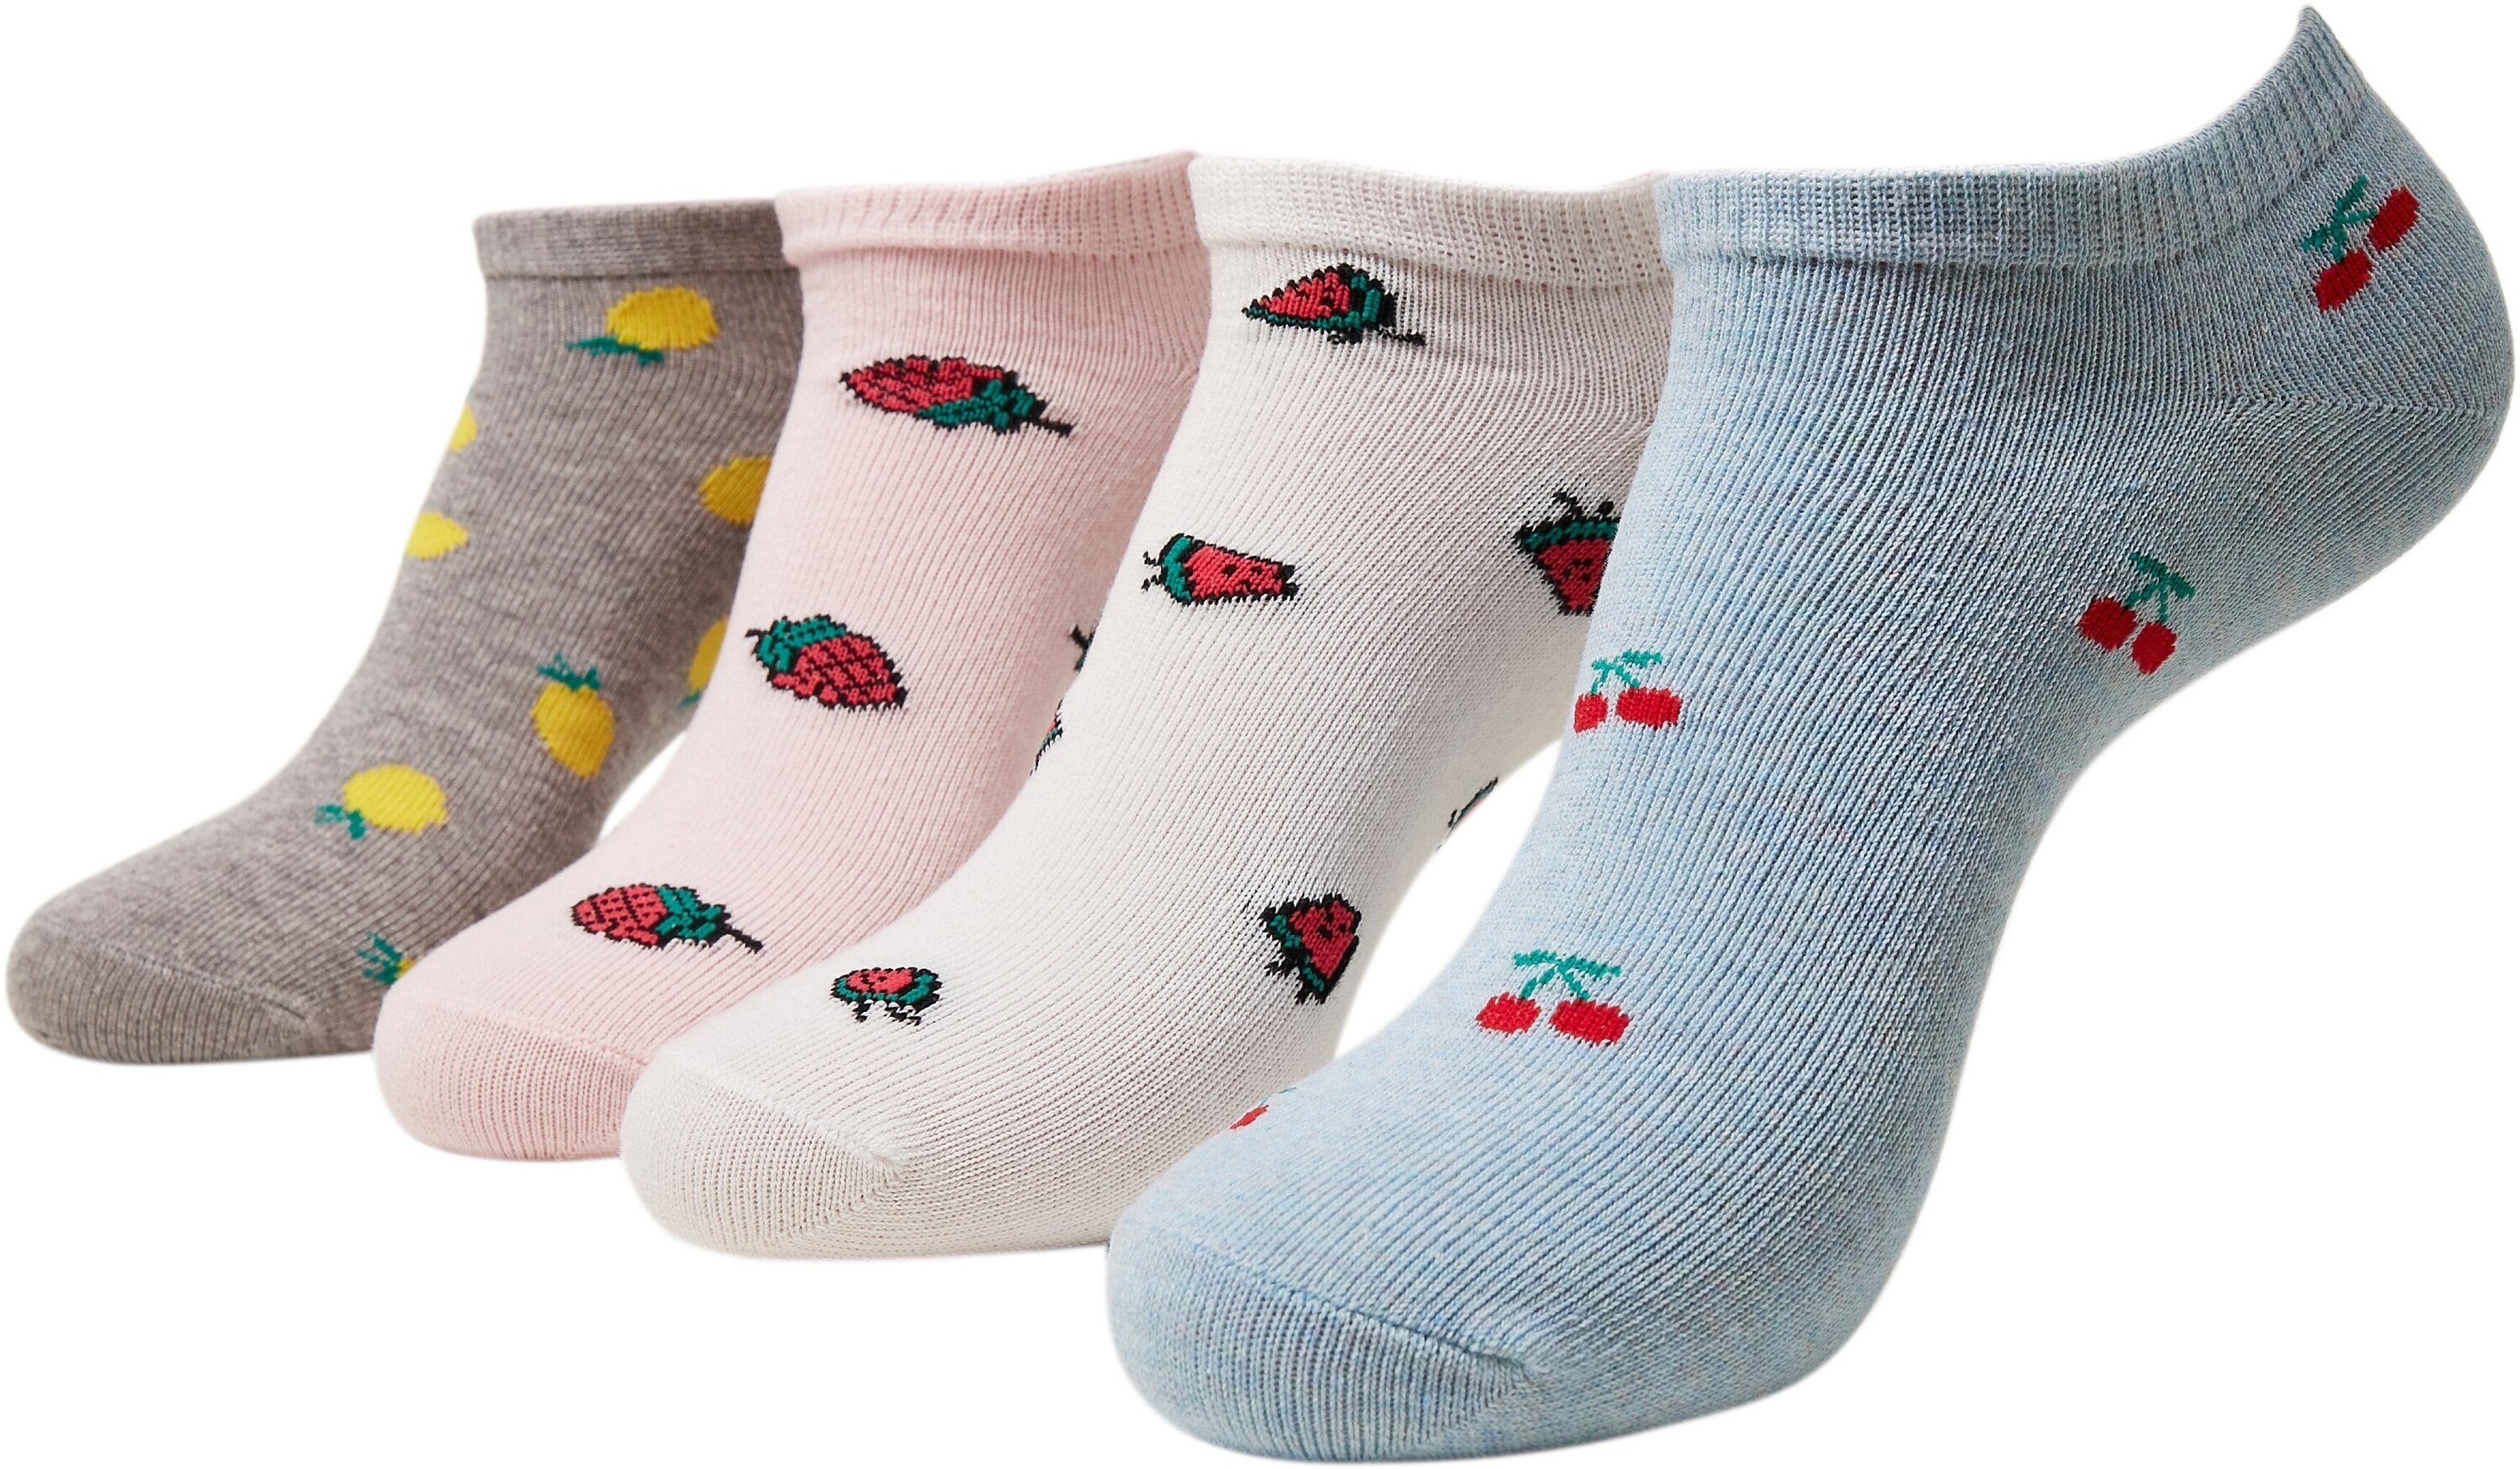 CLASSICS URBAN Freizeitsocken 4-Pack Socks Fruit Yarn (1-Paar) Recycled Invisible Accessoires